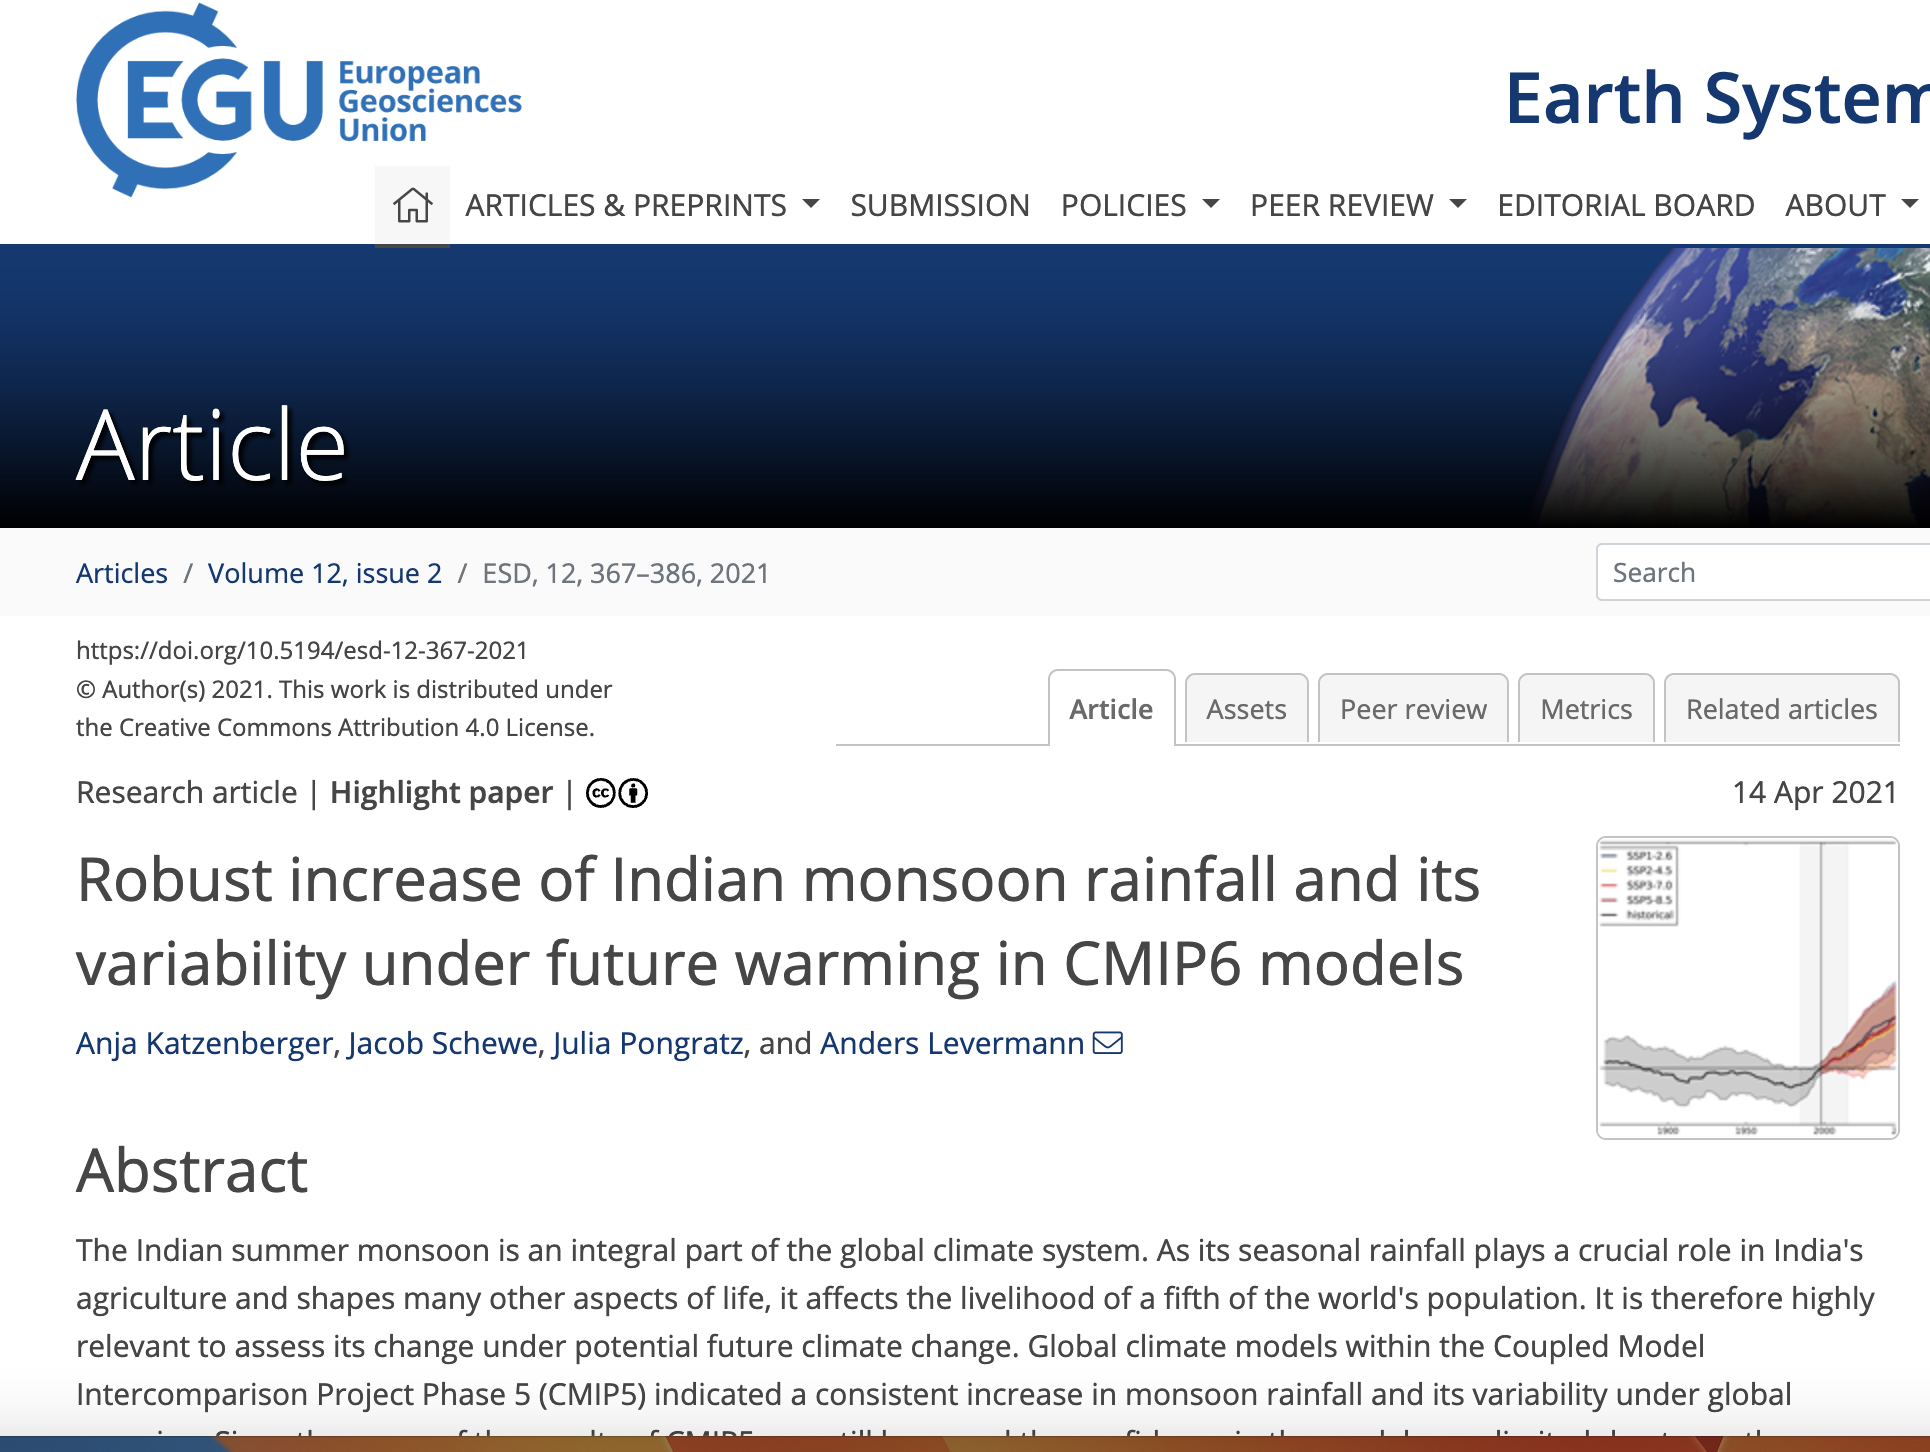 WP5 International cooperation, development and resilience- Robust increase of Indian monsoon rainfall and its variability under future warming in CMIP6 models